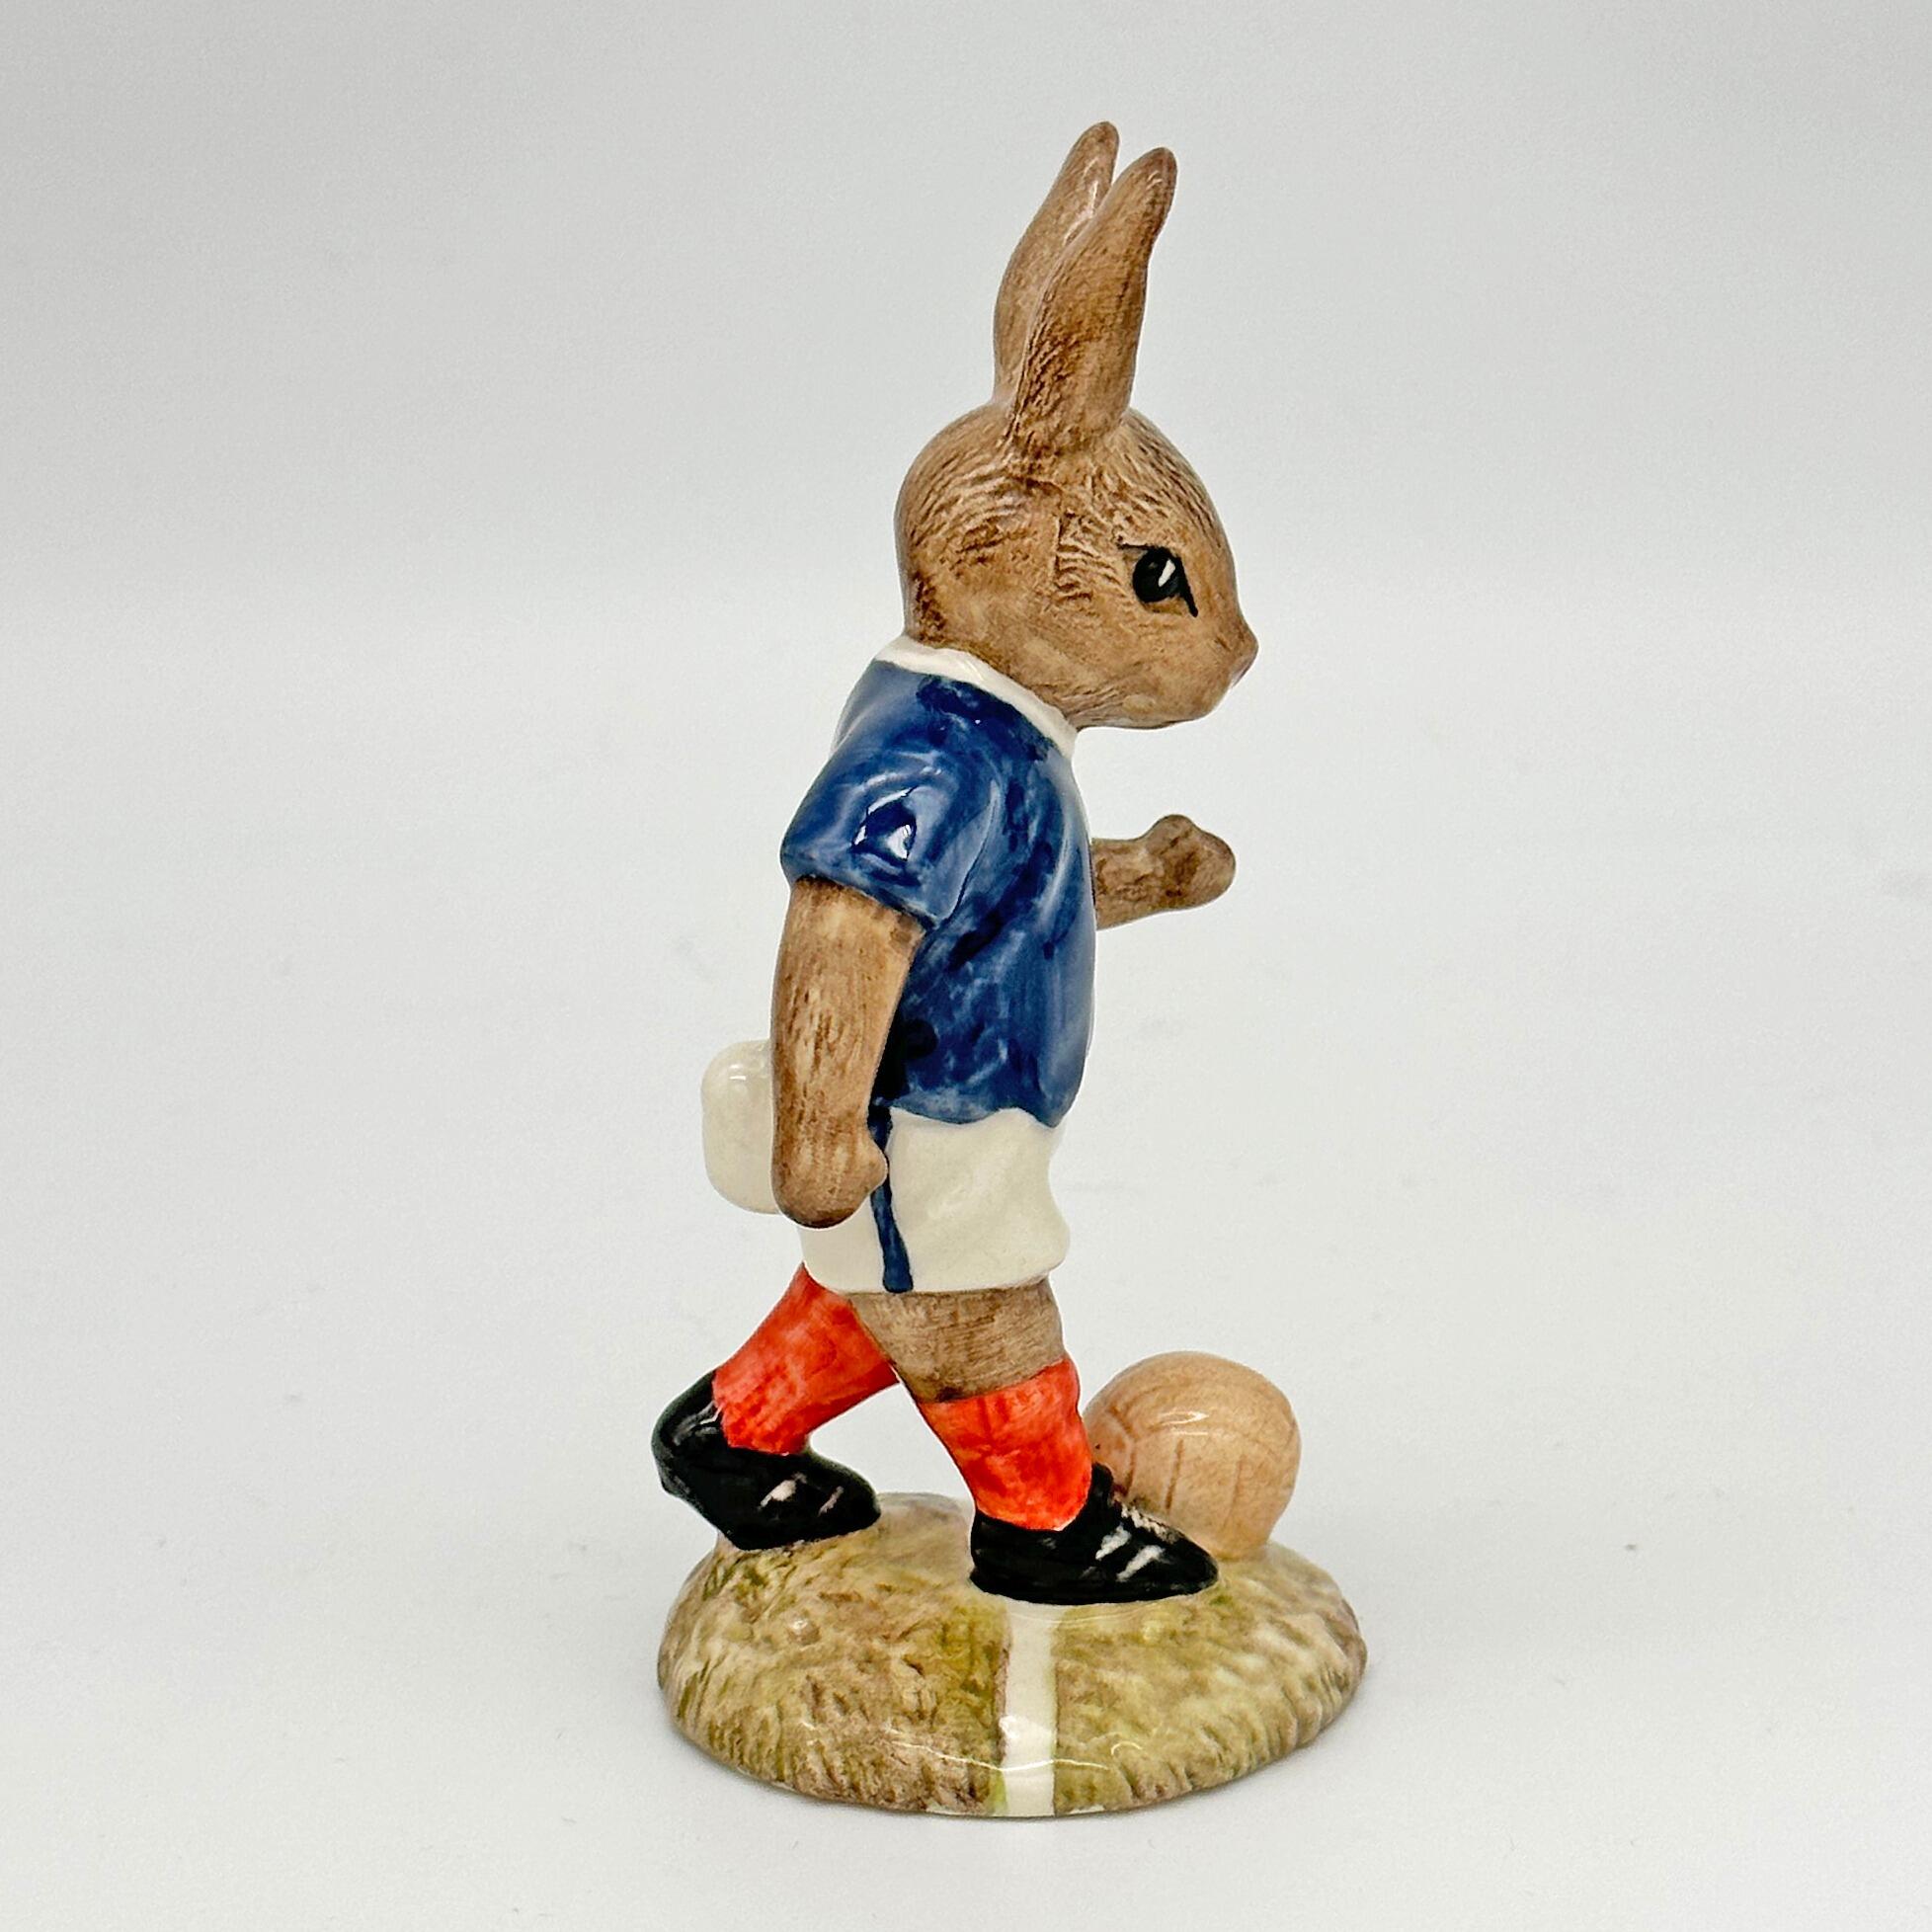 Royal Doulton Bunnykins figure - DB123 Soccer Playerin Blue and White - right